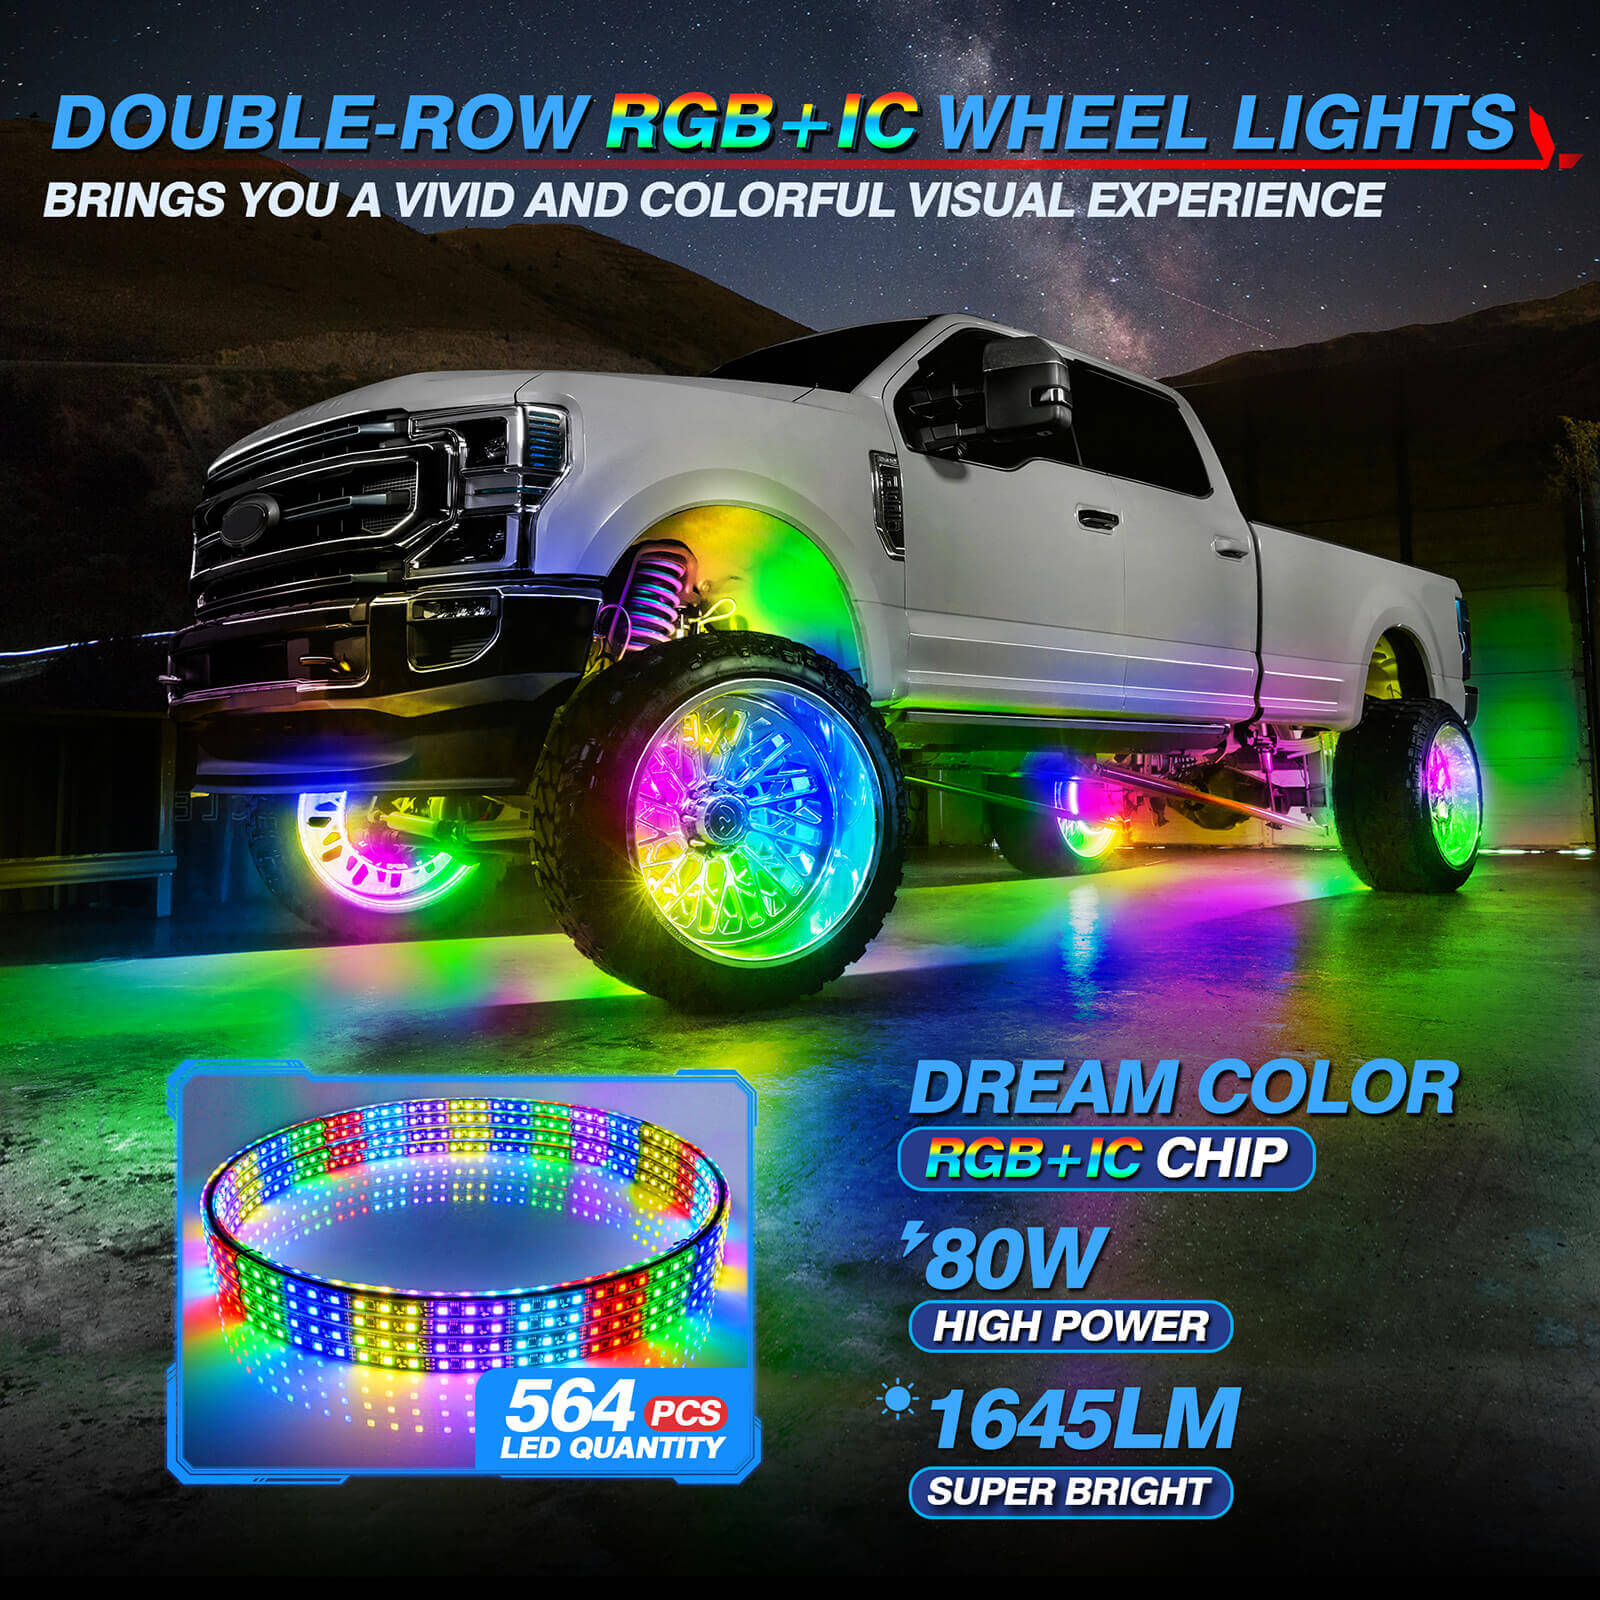 Upgraded 15.5″/17″ V1 RGB + IC Wheel Ring Lights Kit Dream Color, Double-Row Chasing Color Flow Neon Wheel Rim Lights